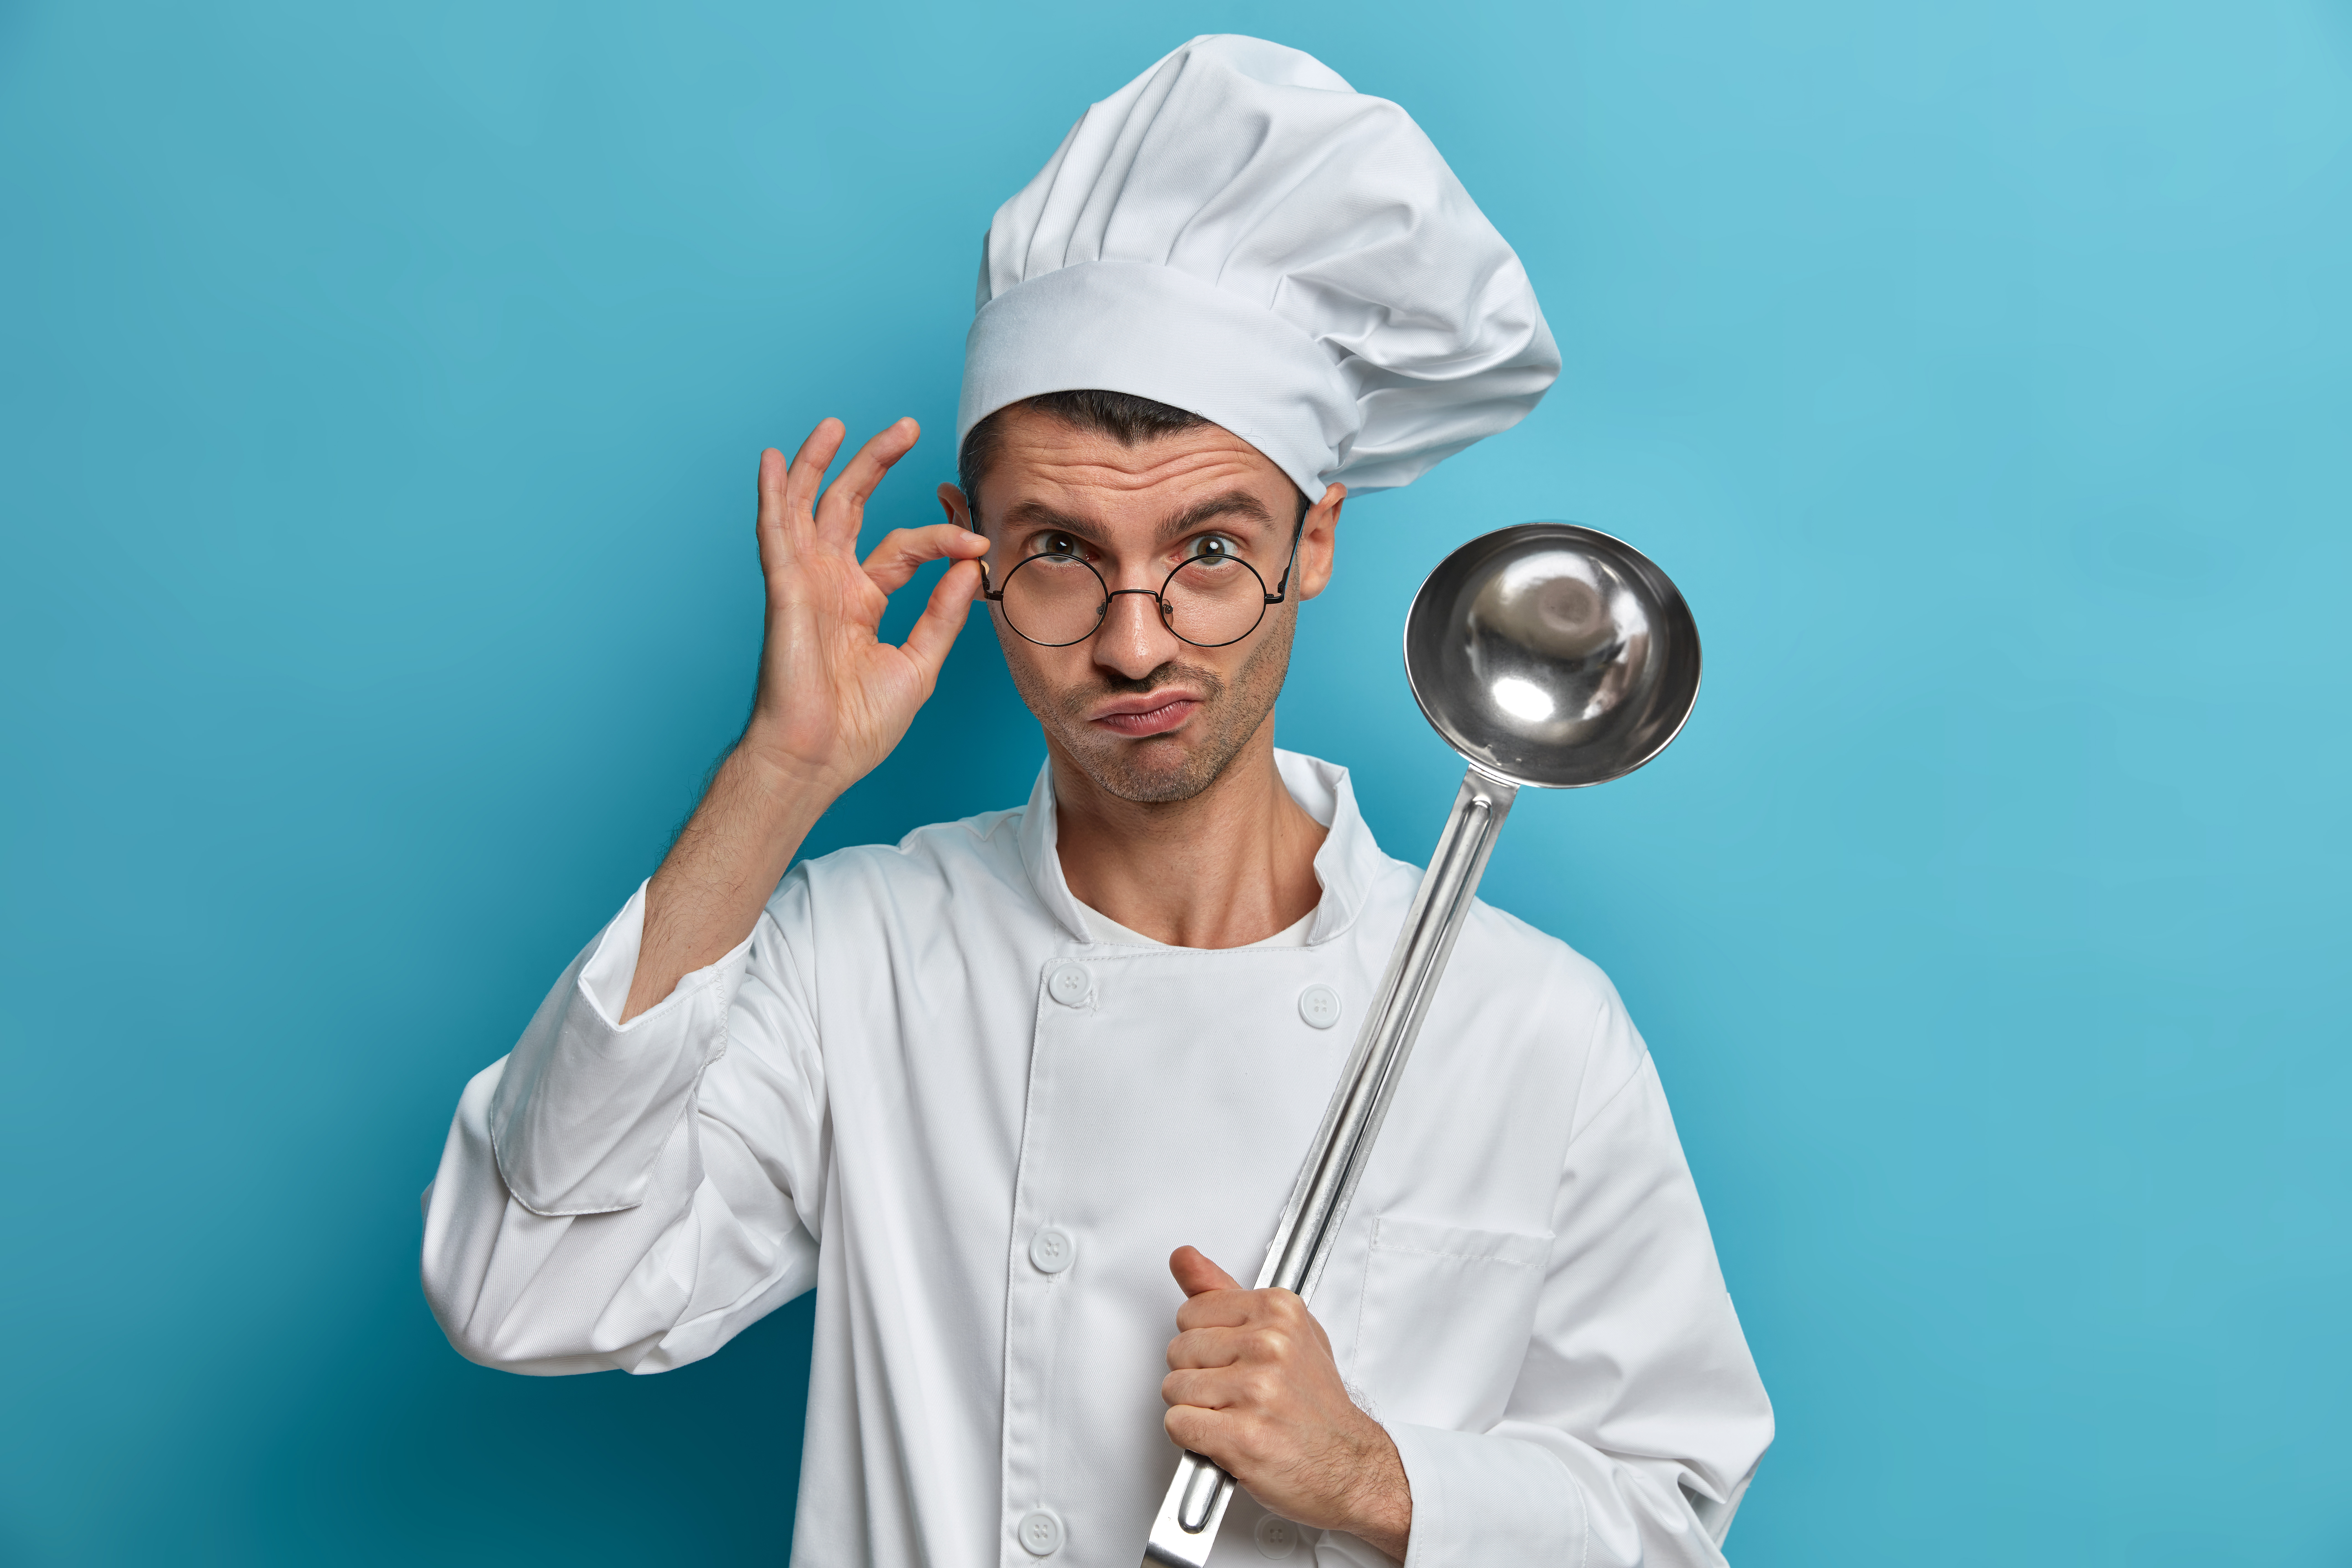 chef cook poses commercial kitchen looks seriously through glasses holds ladle prepares meal ready cook dish listens advice